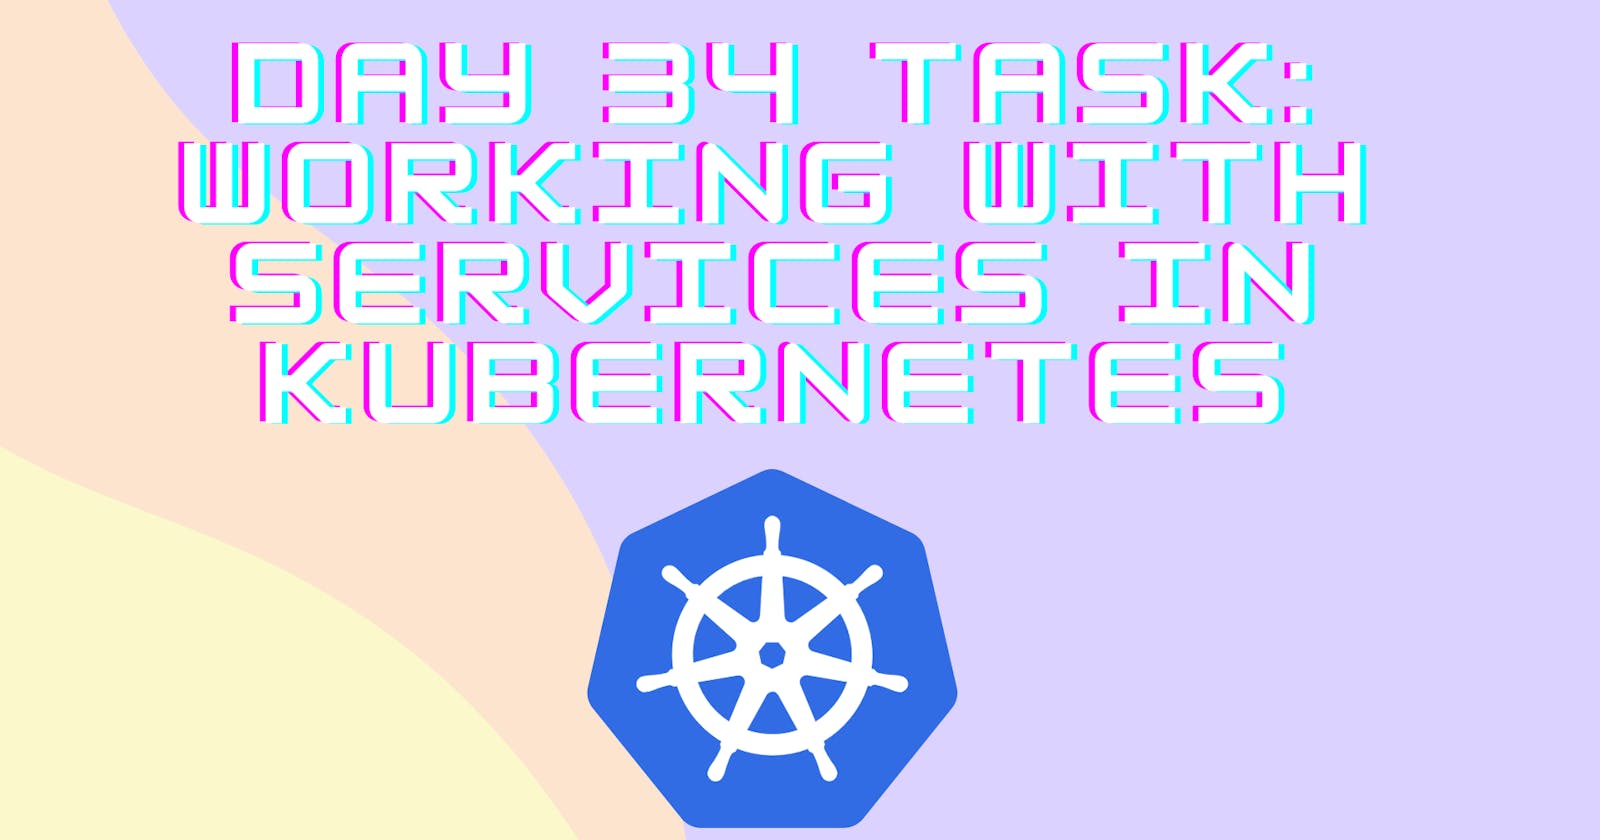 Day 34 Task: Working with Services in Kubernetes